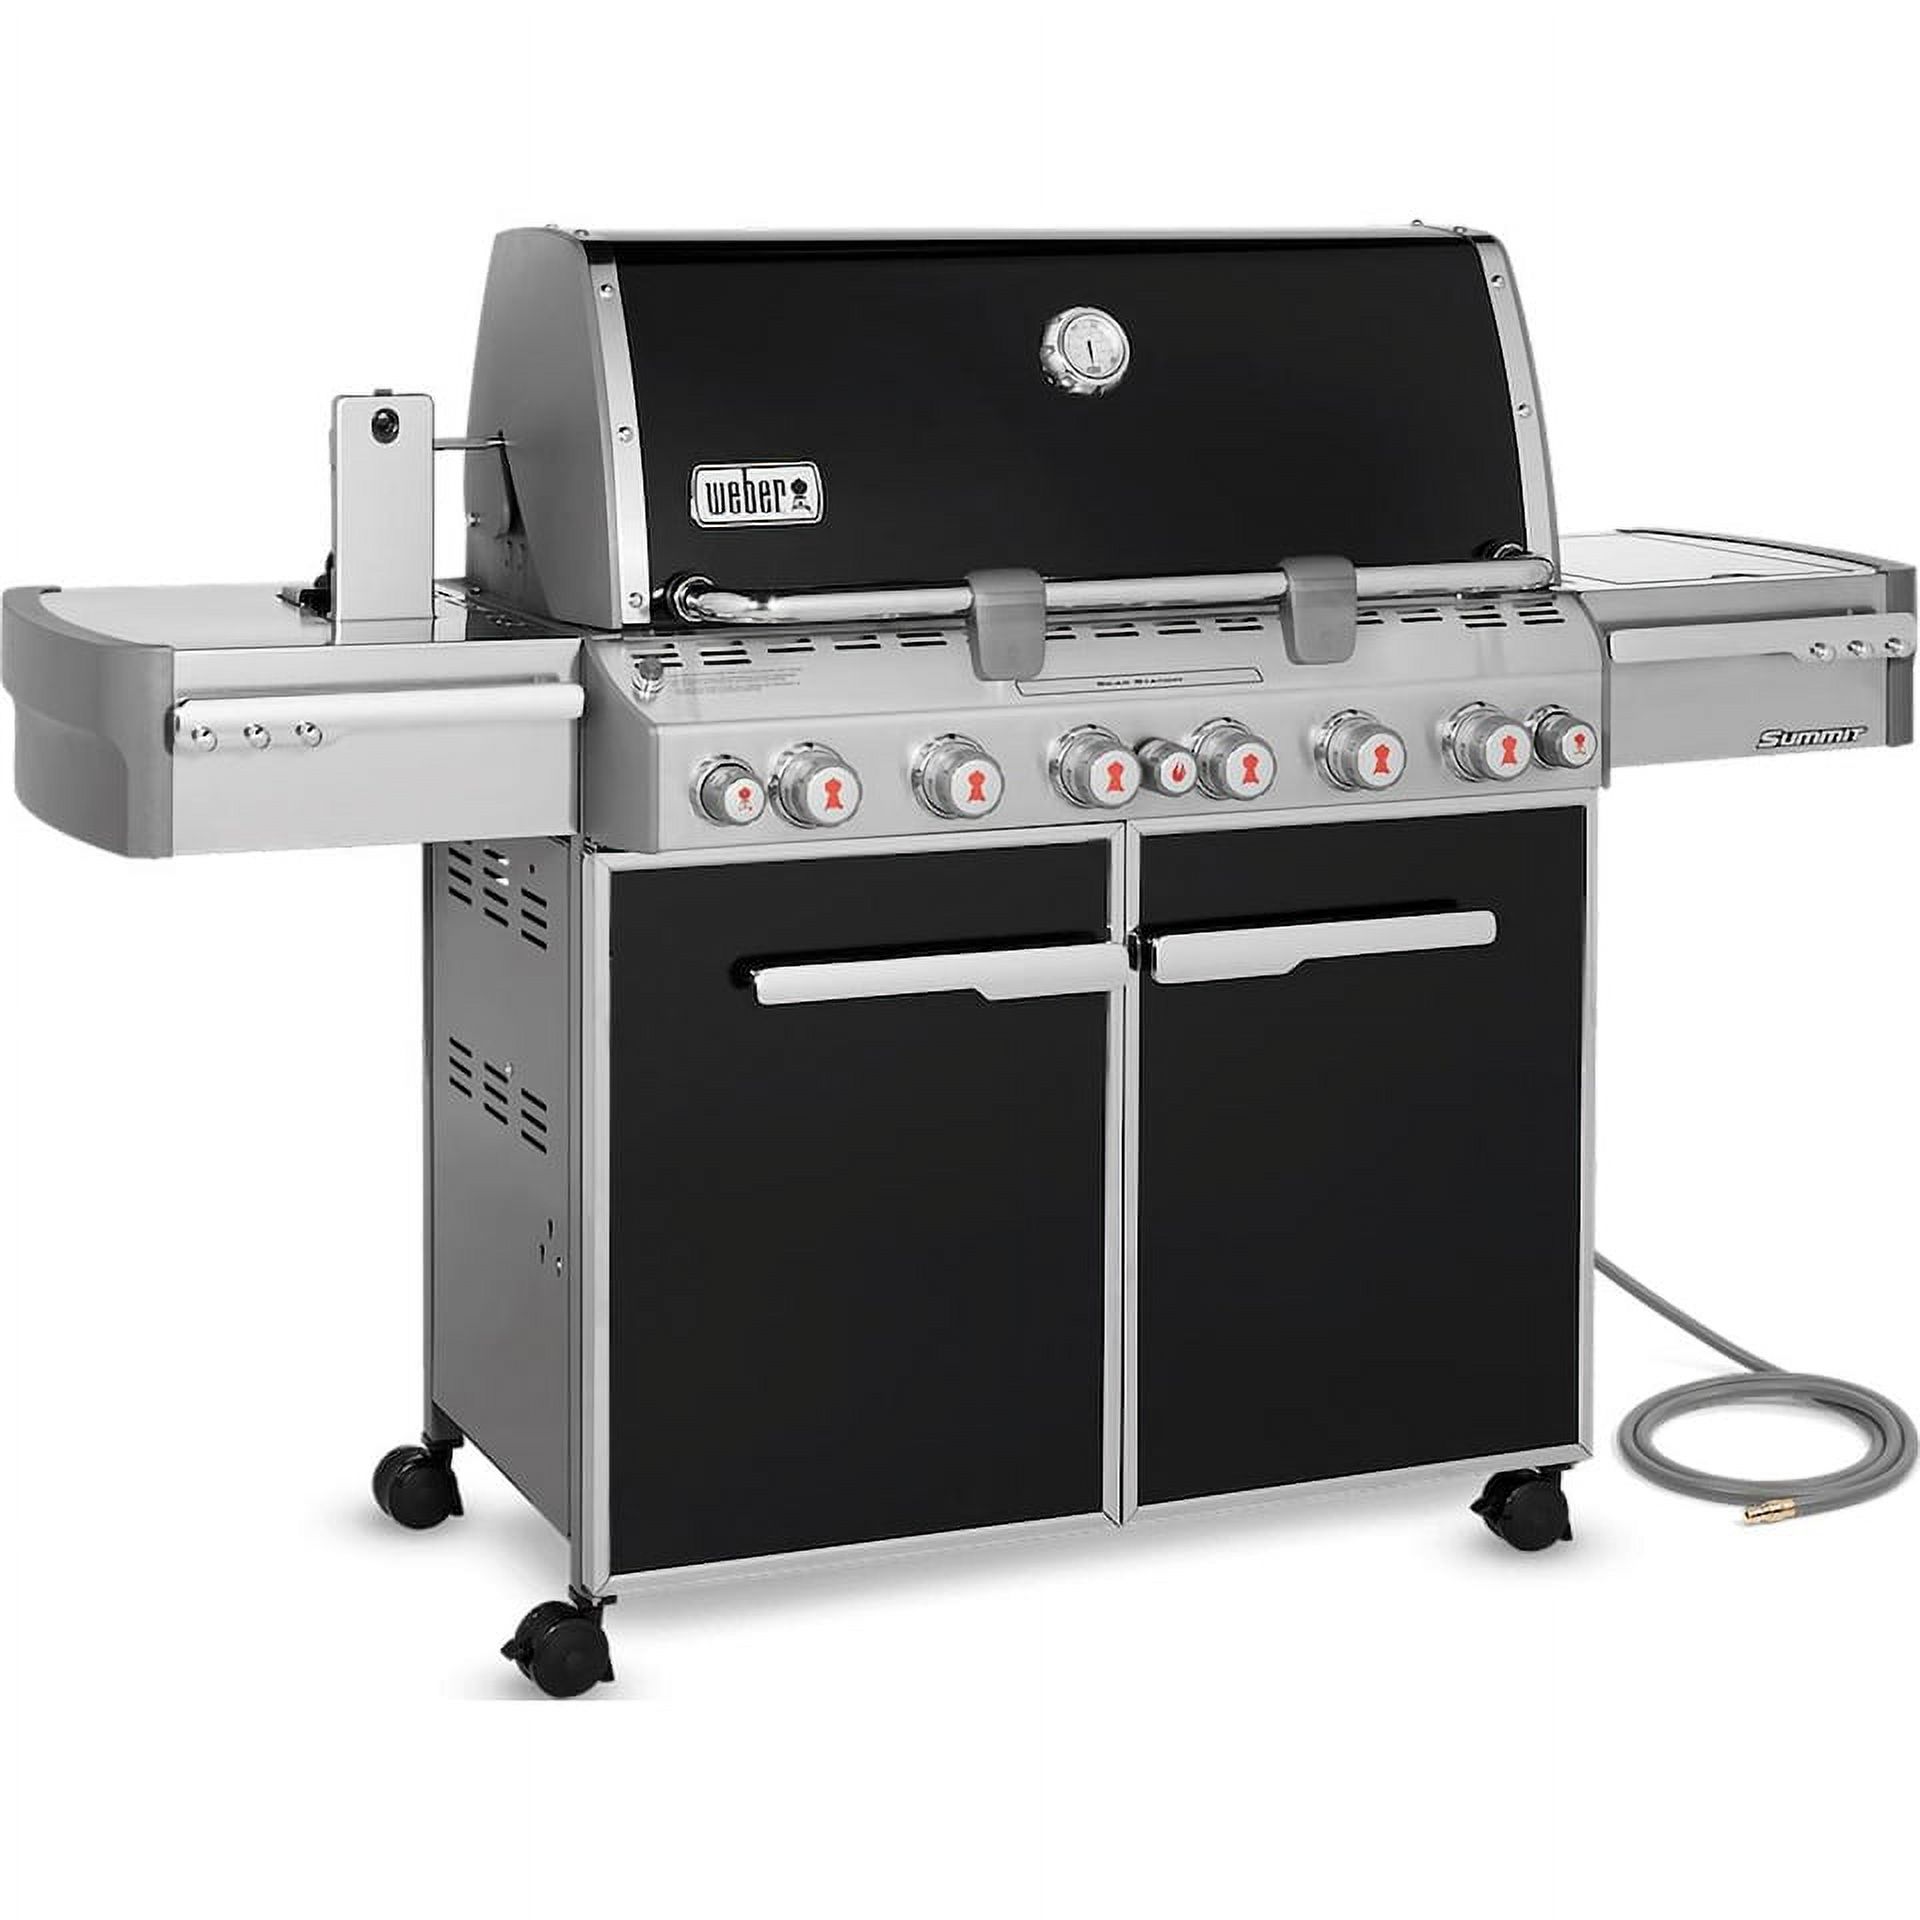 Weber Summit E-670 Gas Grill - image 2 of 6